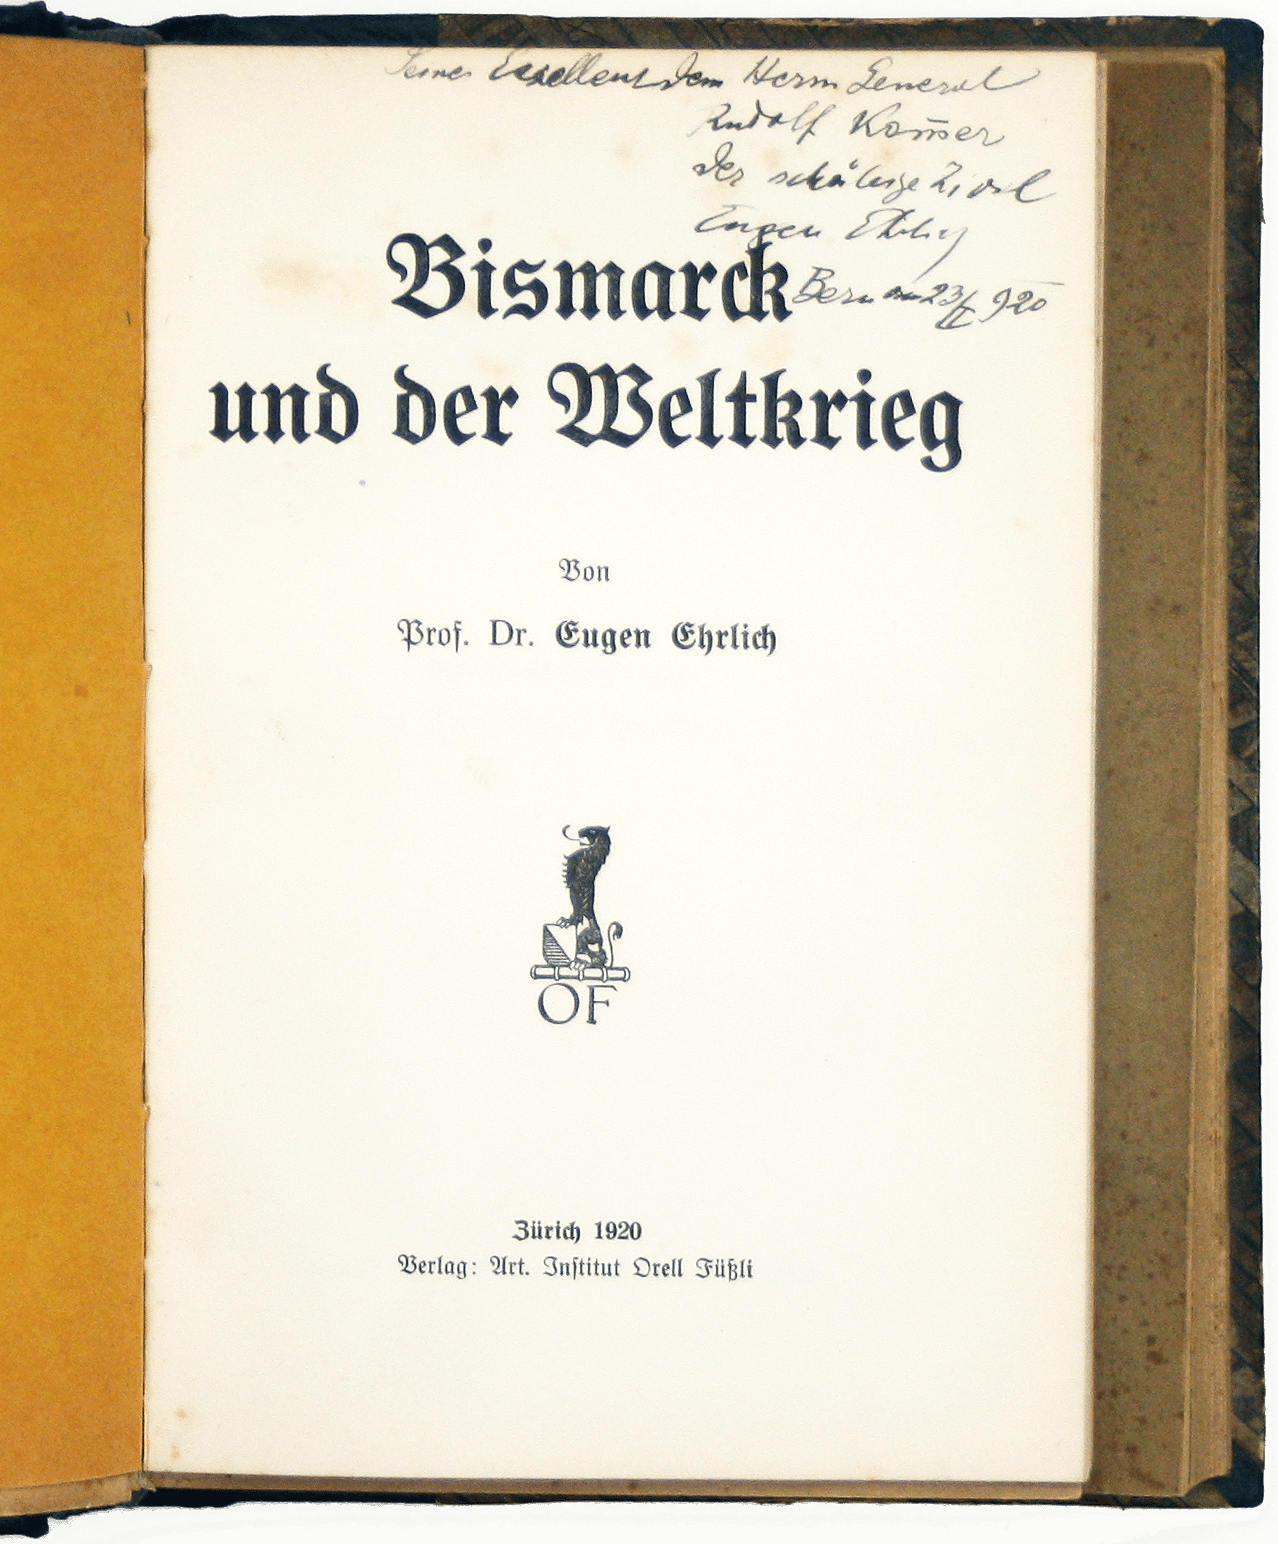 Krieg und Frieden: A Collection of Inscribed Pamphlets assembled by Rudolph Kommer